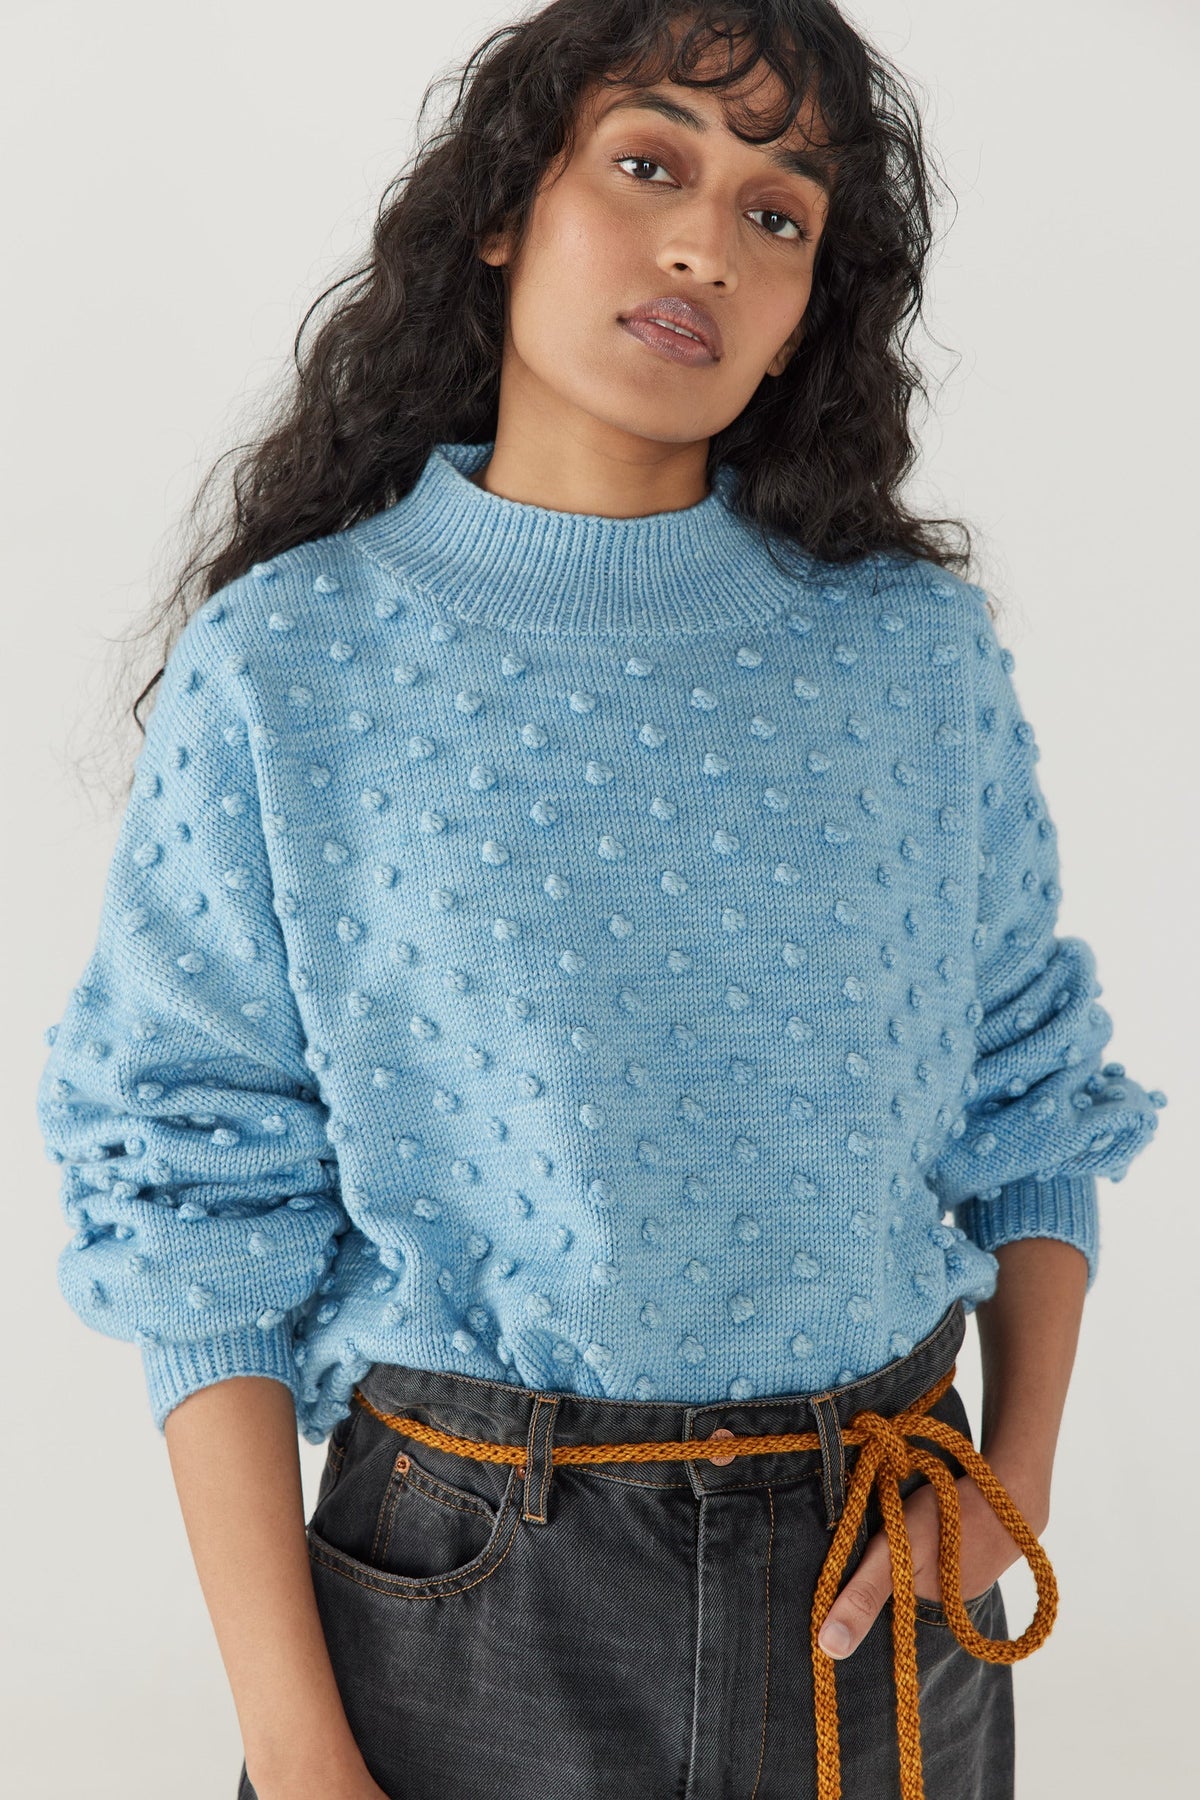 Adult Popcorn Sweater - Faded Denim+Model is 5&#39;9&quot; | 31&quot; Bust | 24&quot; Waist | 34&quot; Hips | size 2, wearing a size Small